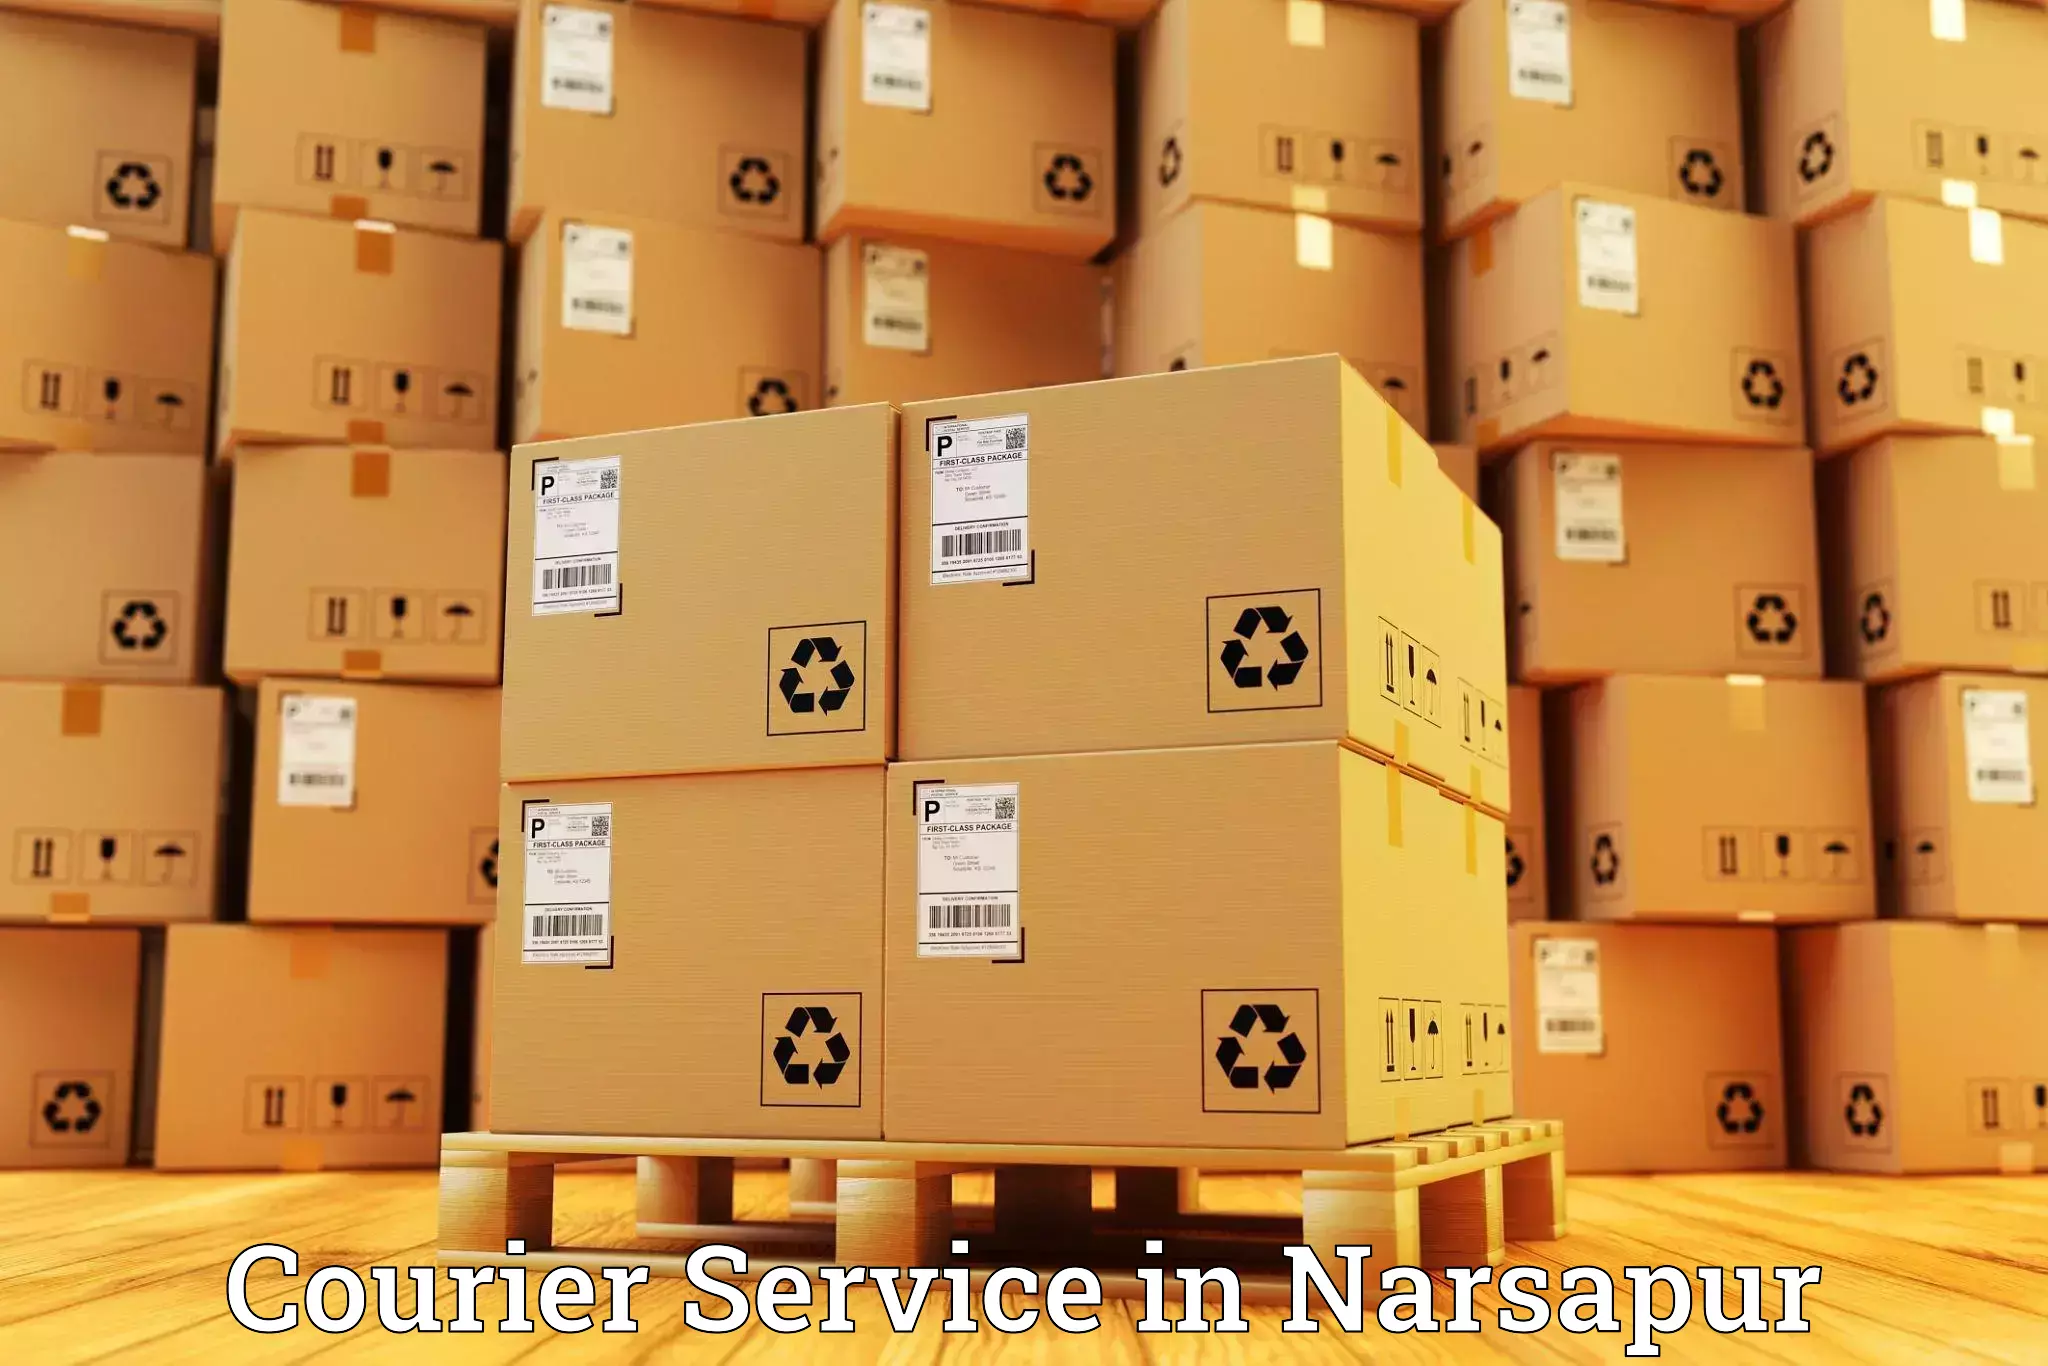 24-hour courier service in Narsapur